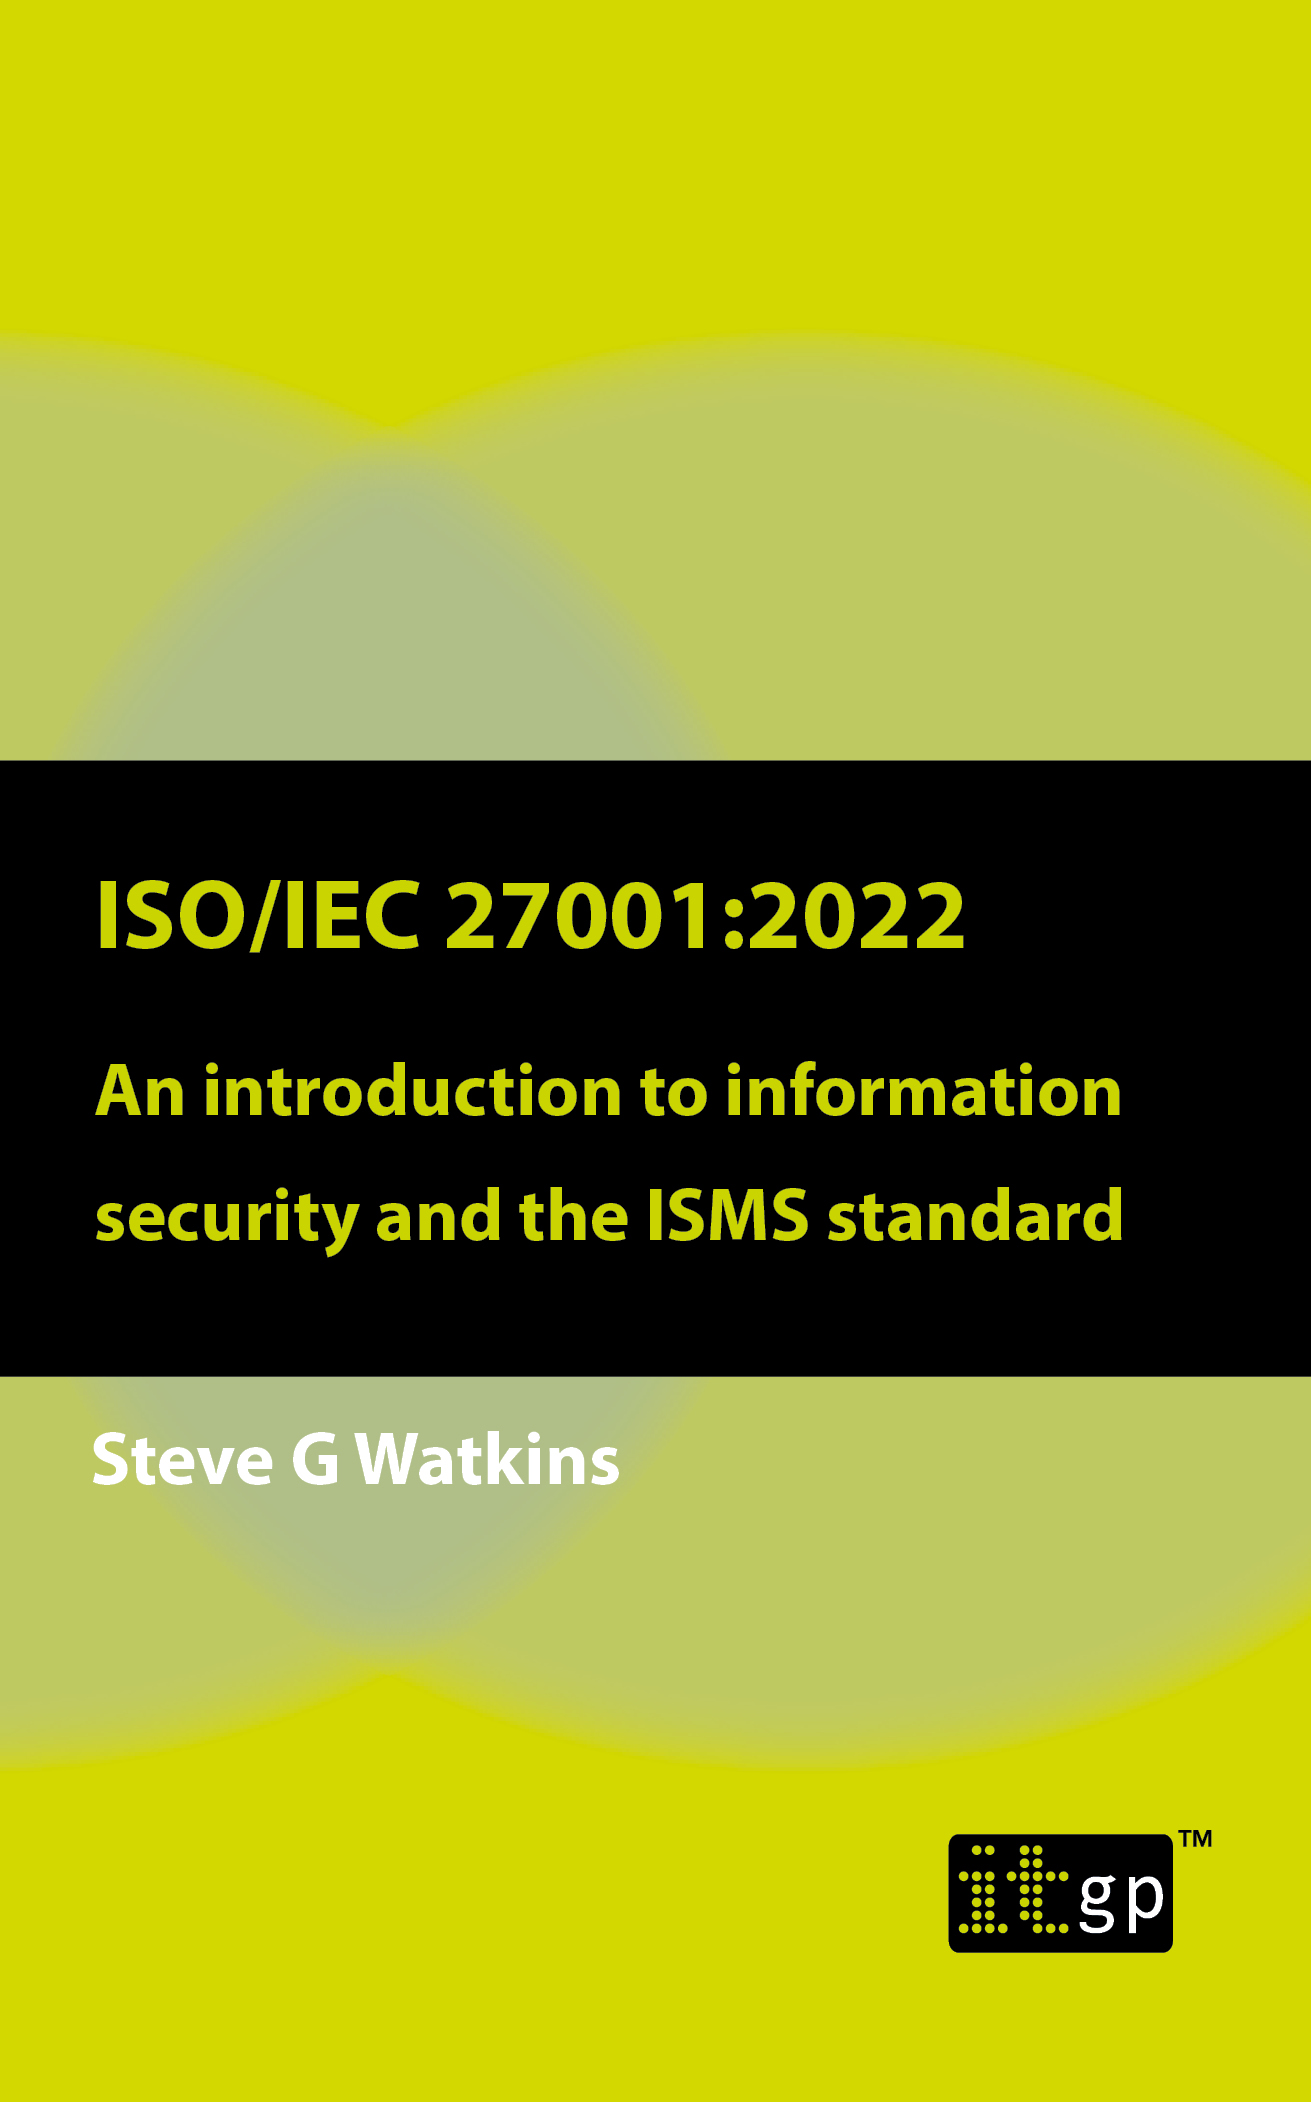 ISO 27001:2022 – An introduction to information security and the ISMS standard